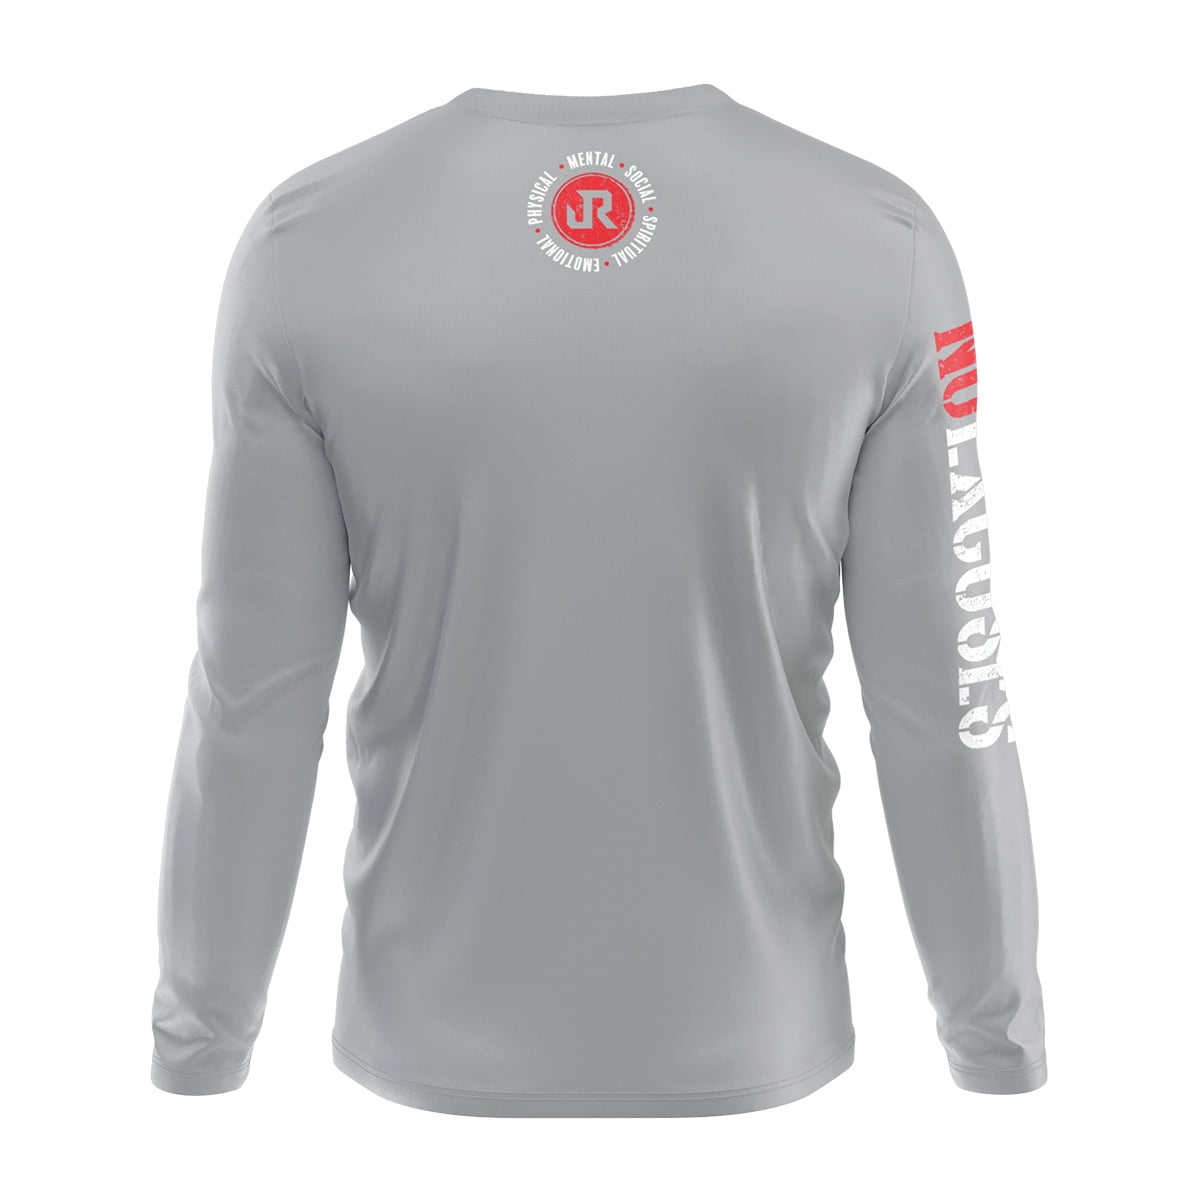 Long Sleeve IOVERCOME Shirt - Get Off The X